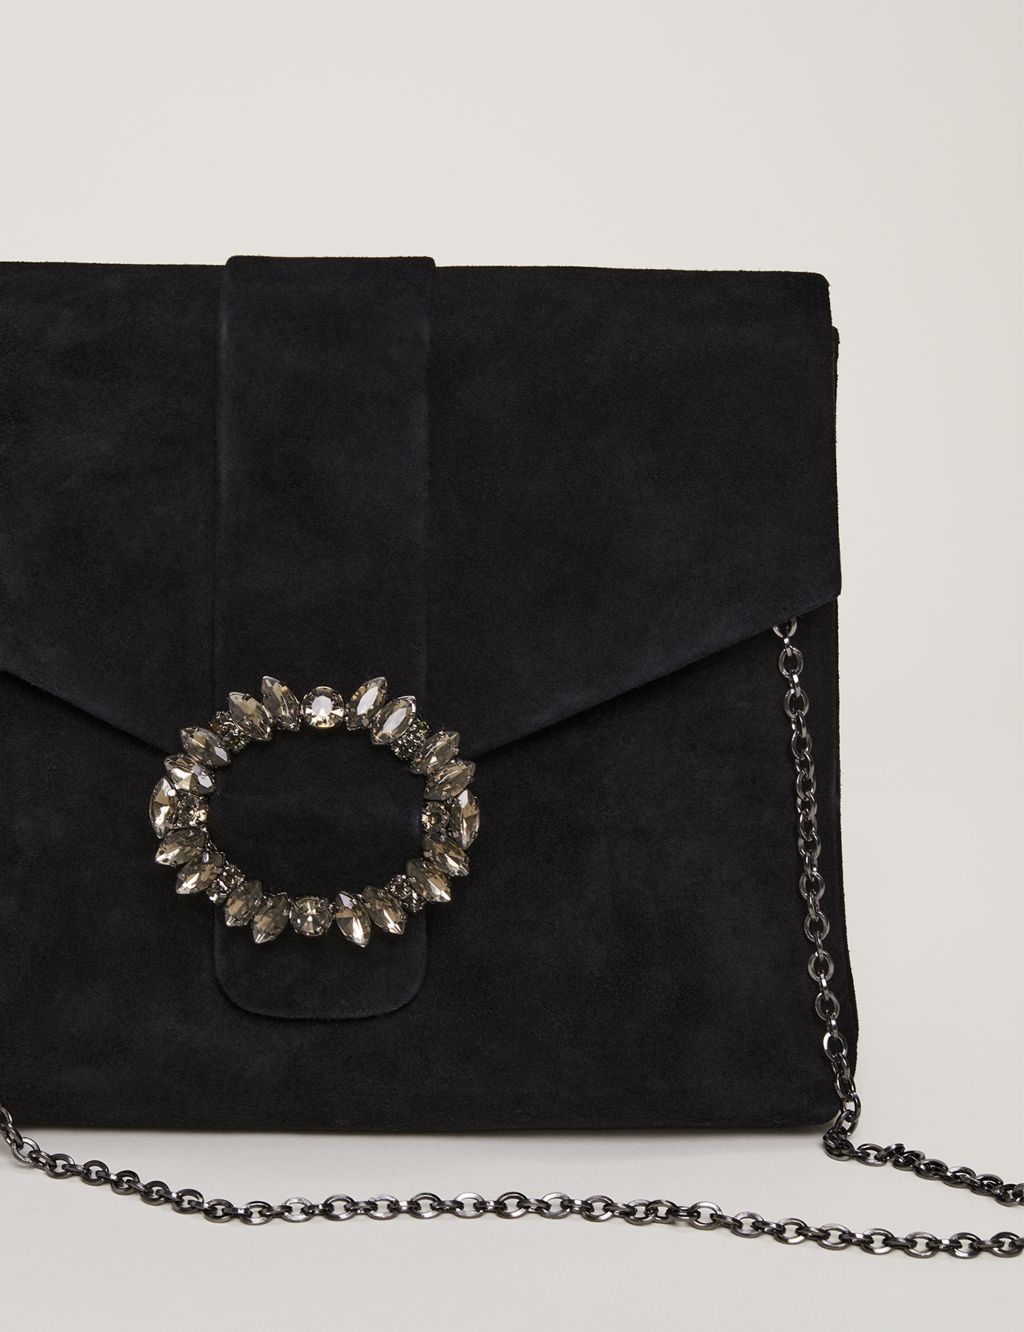 Leather Jewel Front Clutch Bag image 2